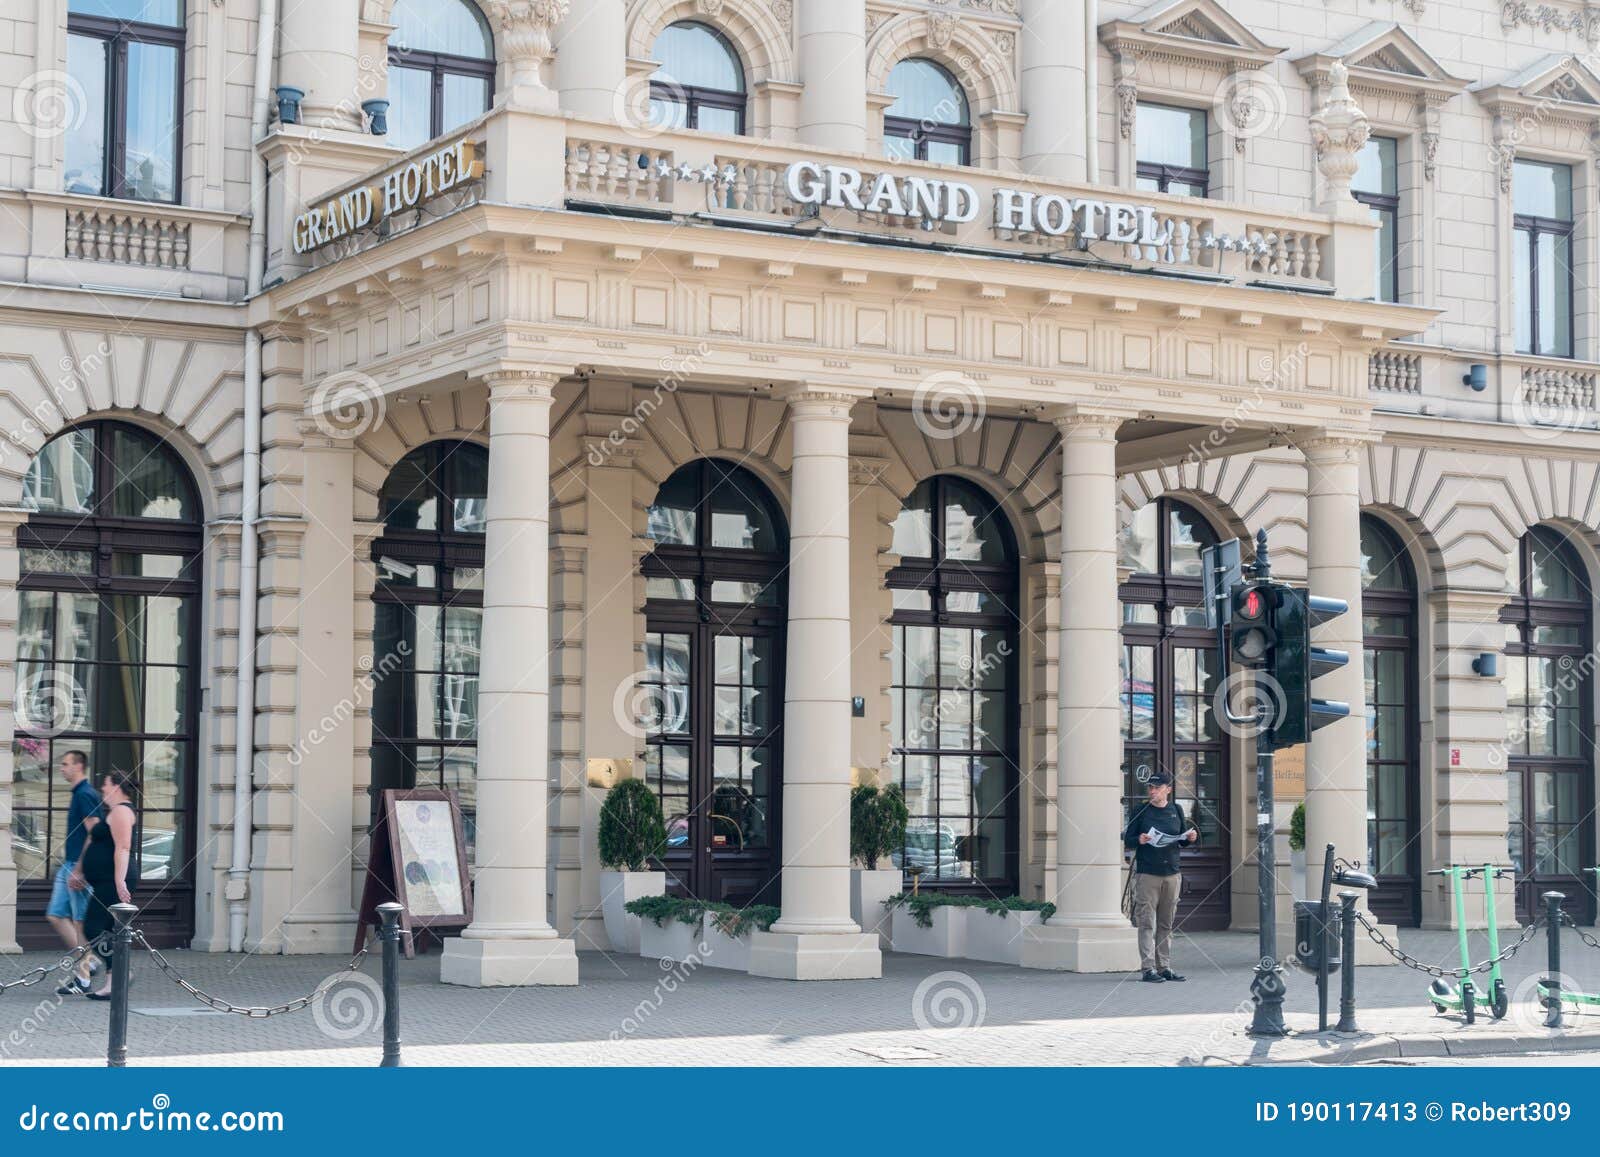 Lublin Grand Hotel Photos Free Royalty Free Stock Photos From Dreamstime